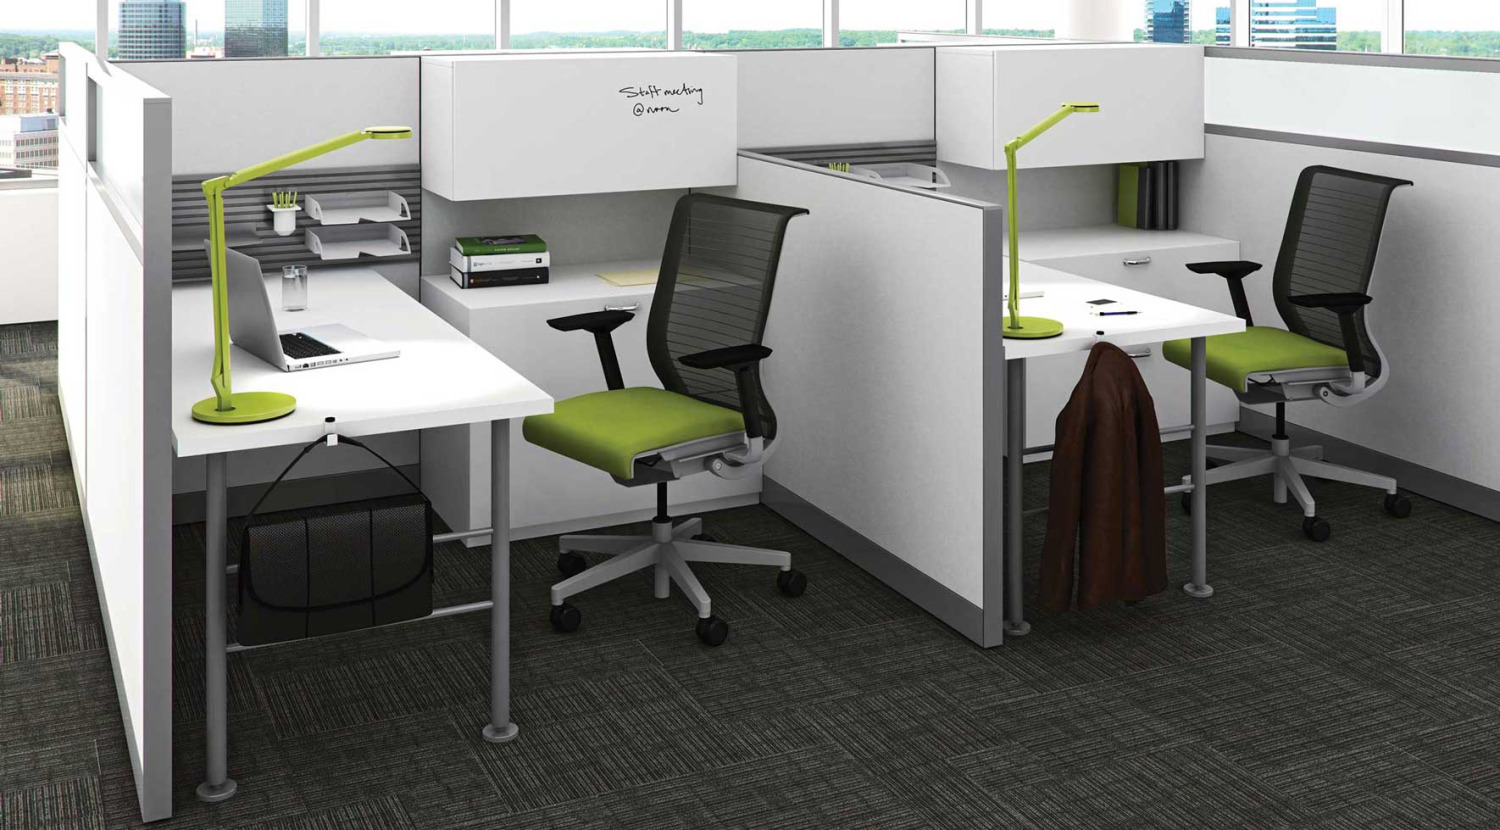 Kick Panel Systems - Office Resources, Inc.